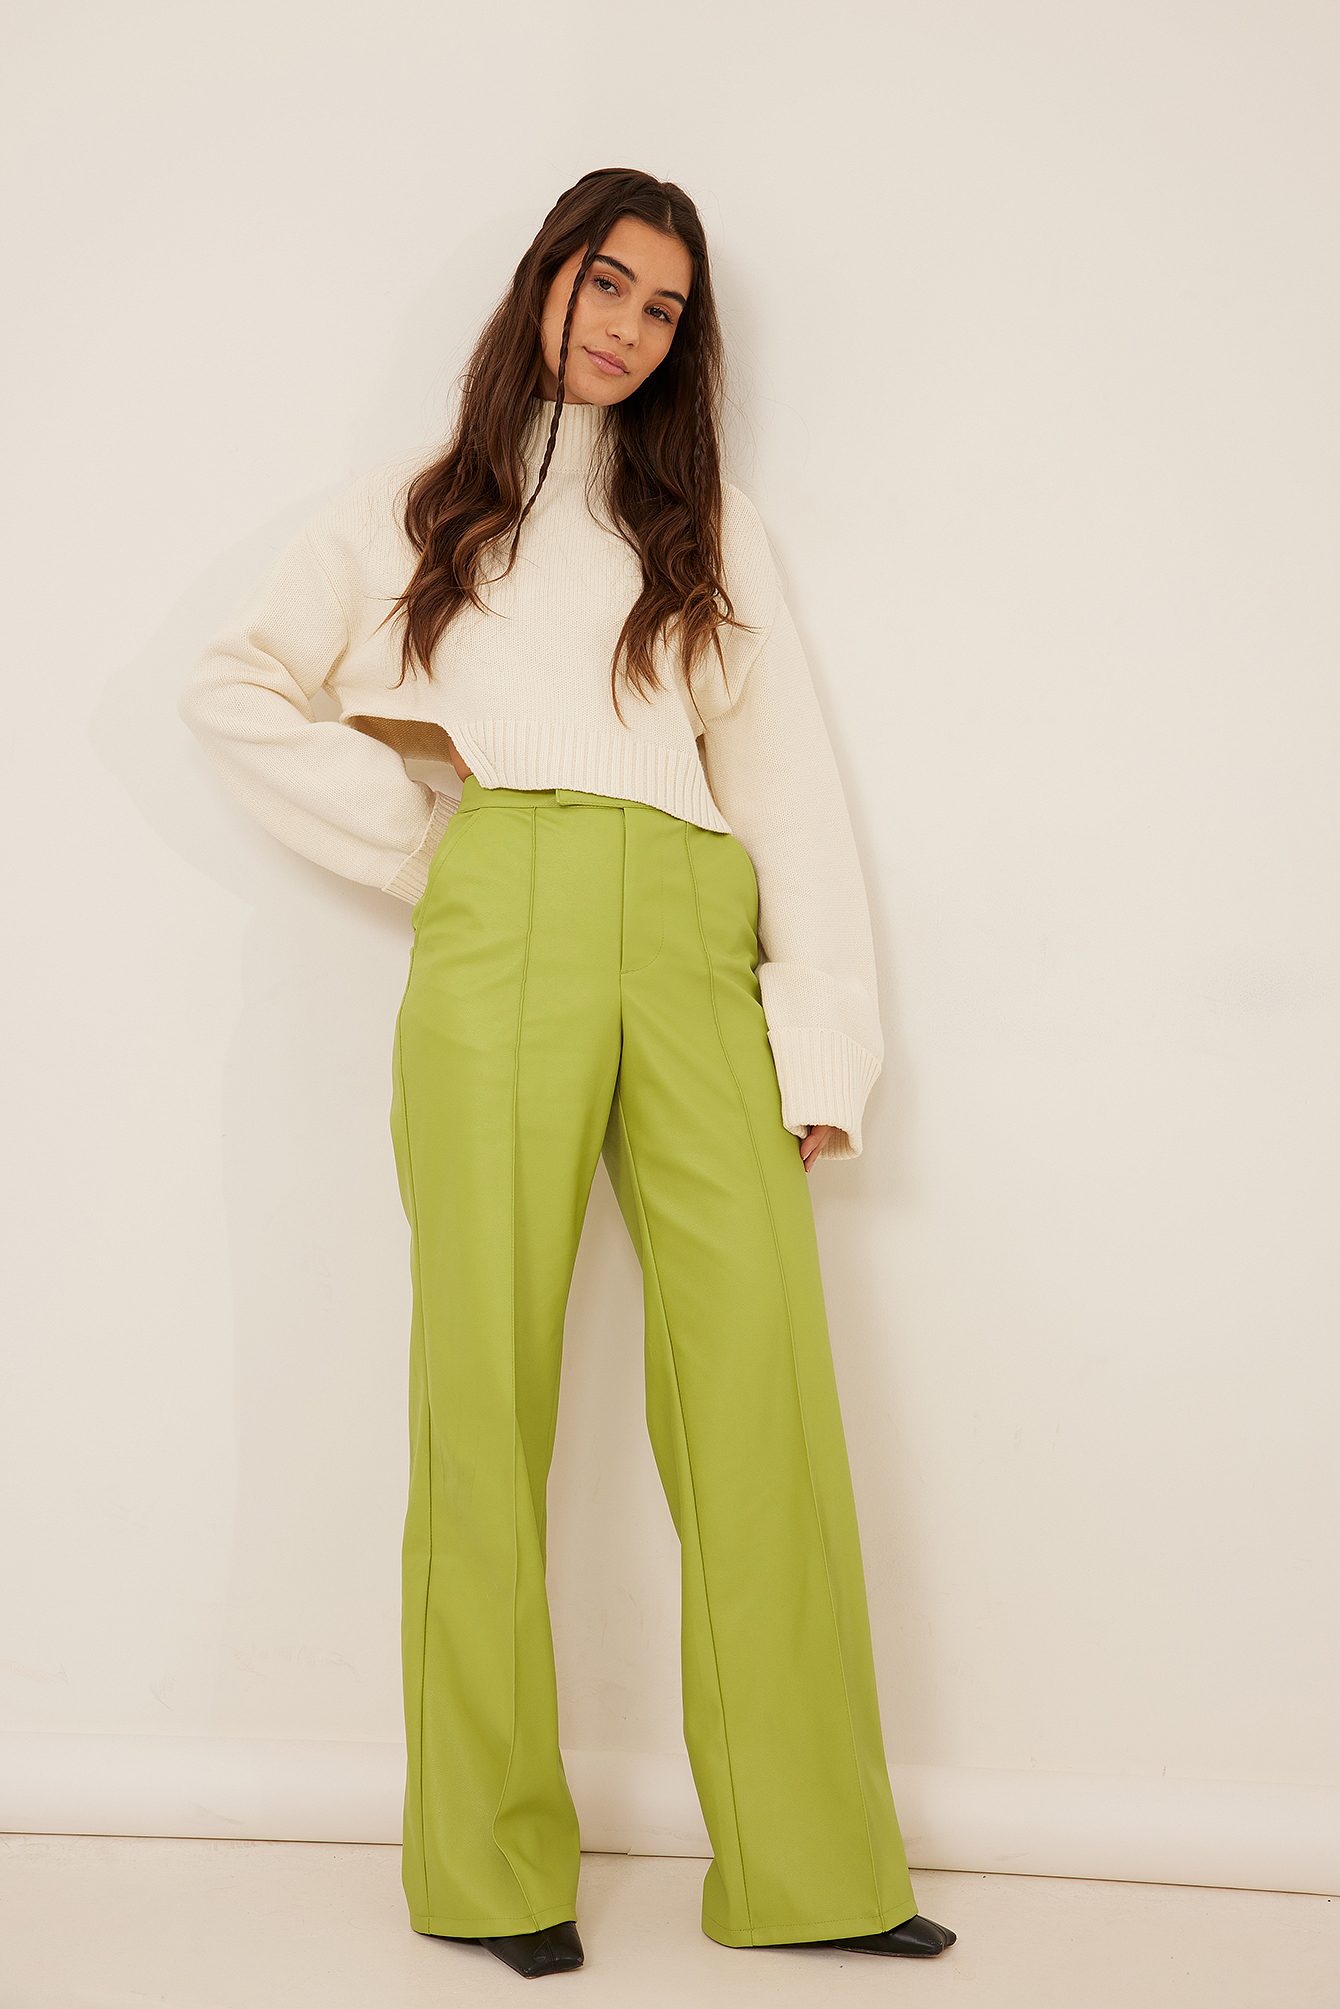 Pleated PU Pants Outfit.